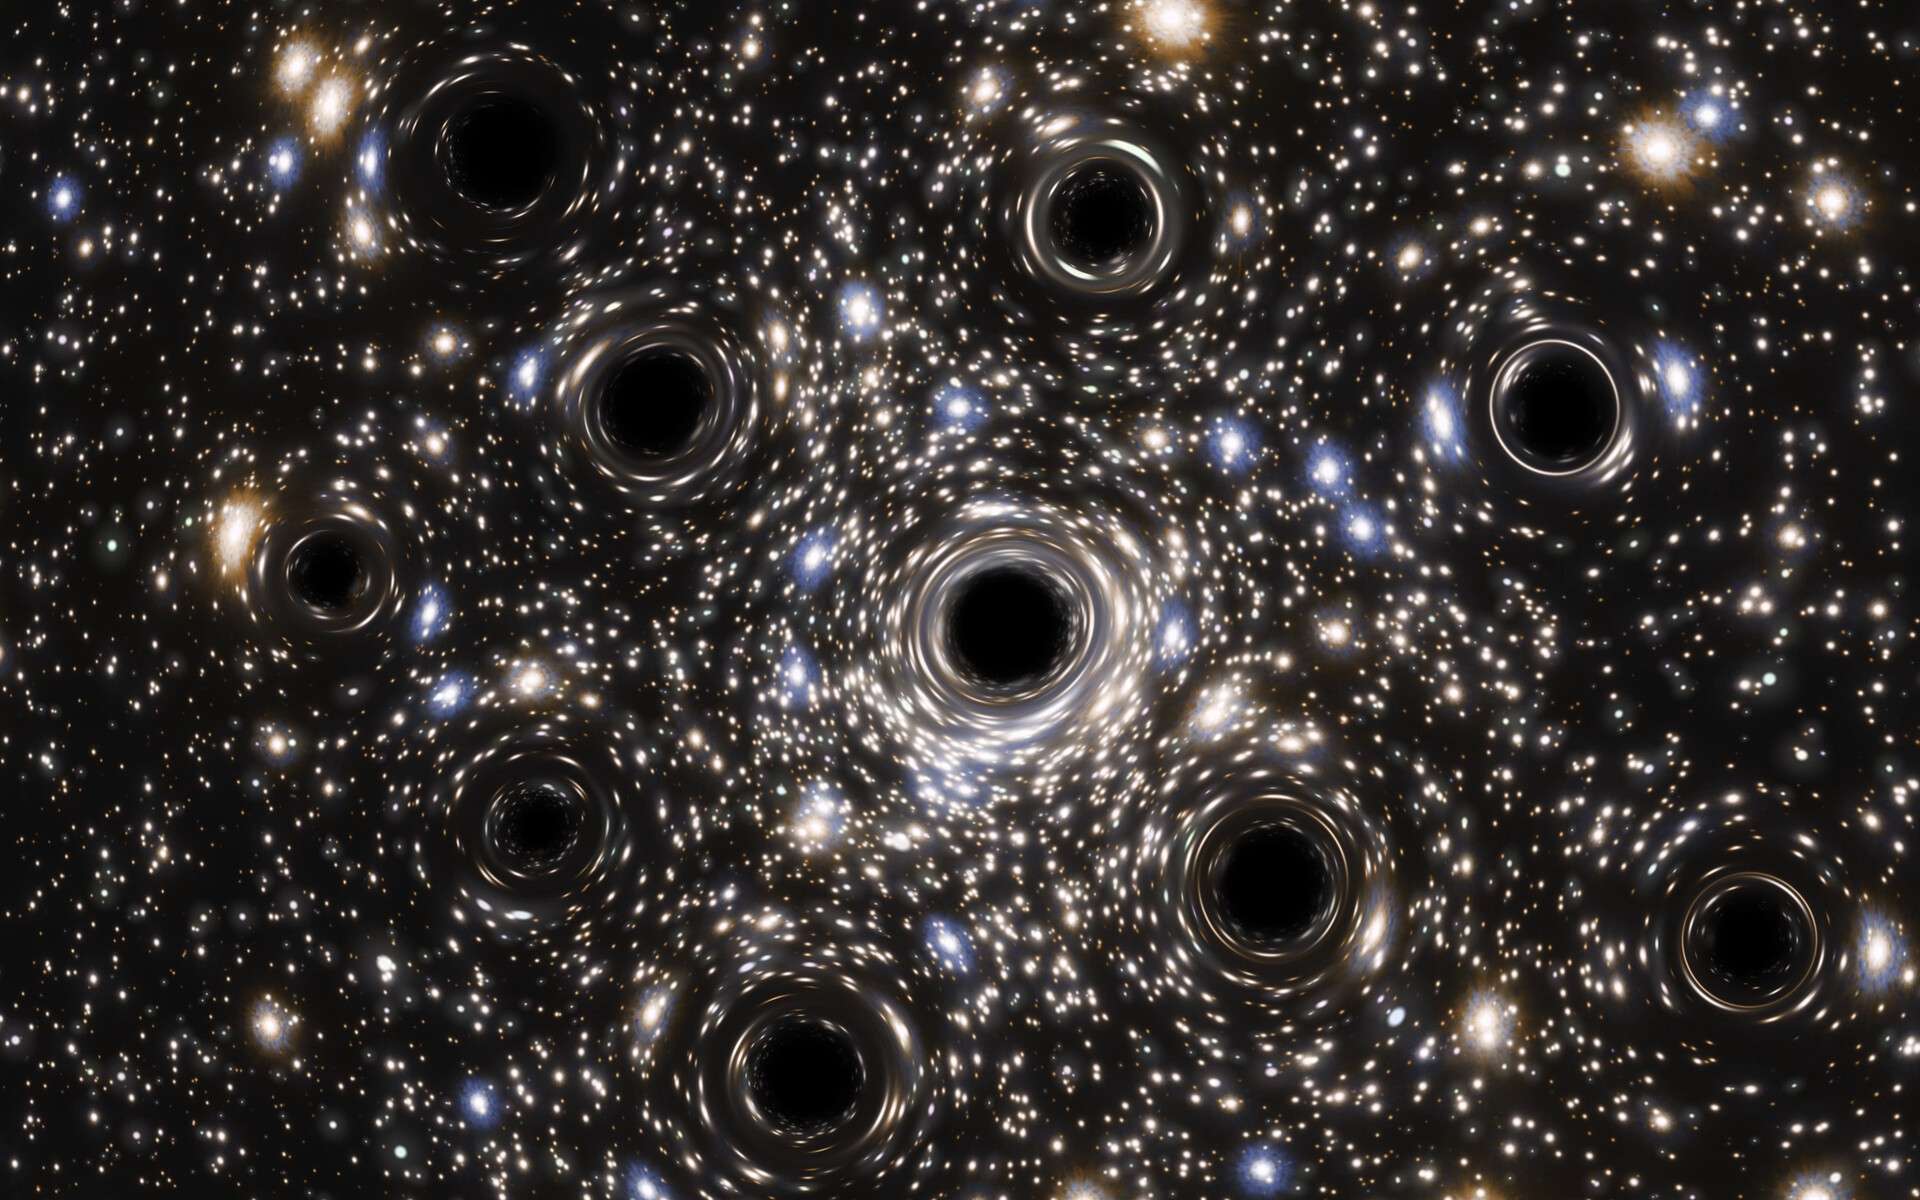 There are about 40 billion black holes in the universe! - Herald of Fashion